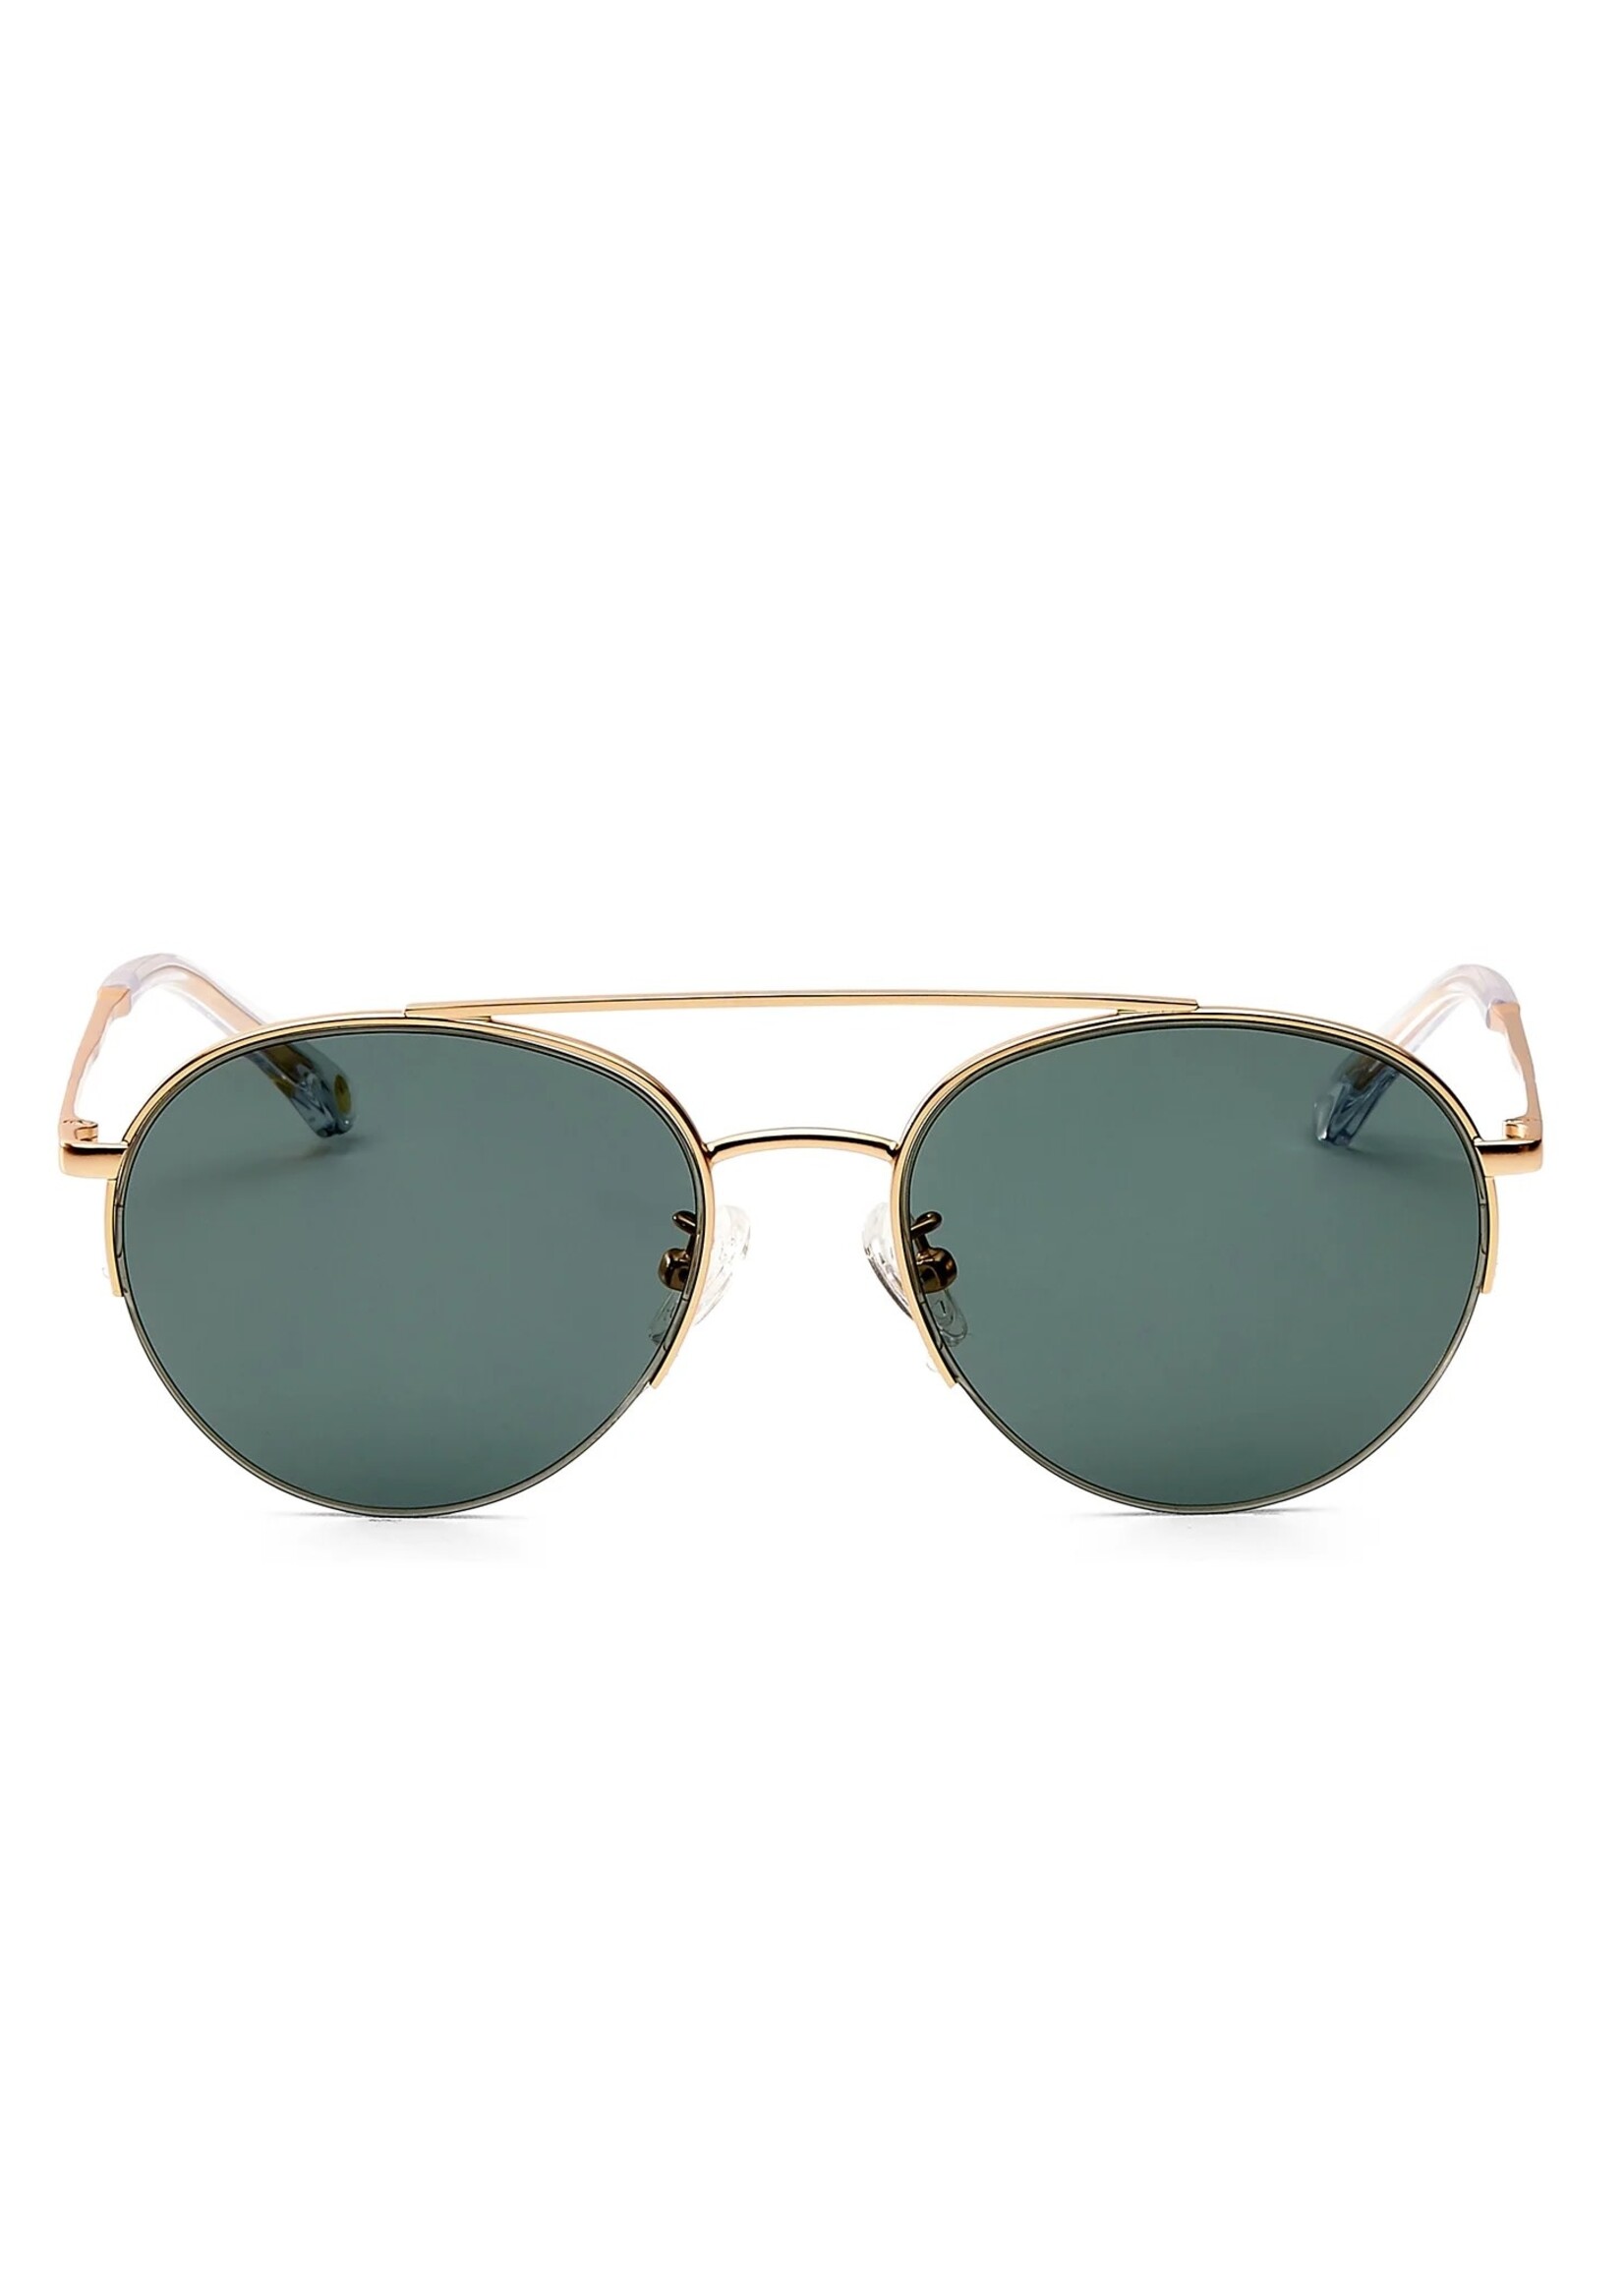 Eleventh Hour Yacht Club Sunglasses Gold Olive